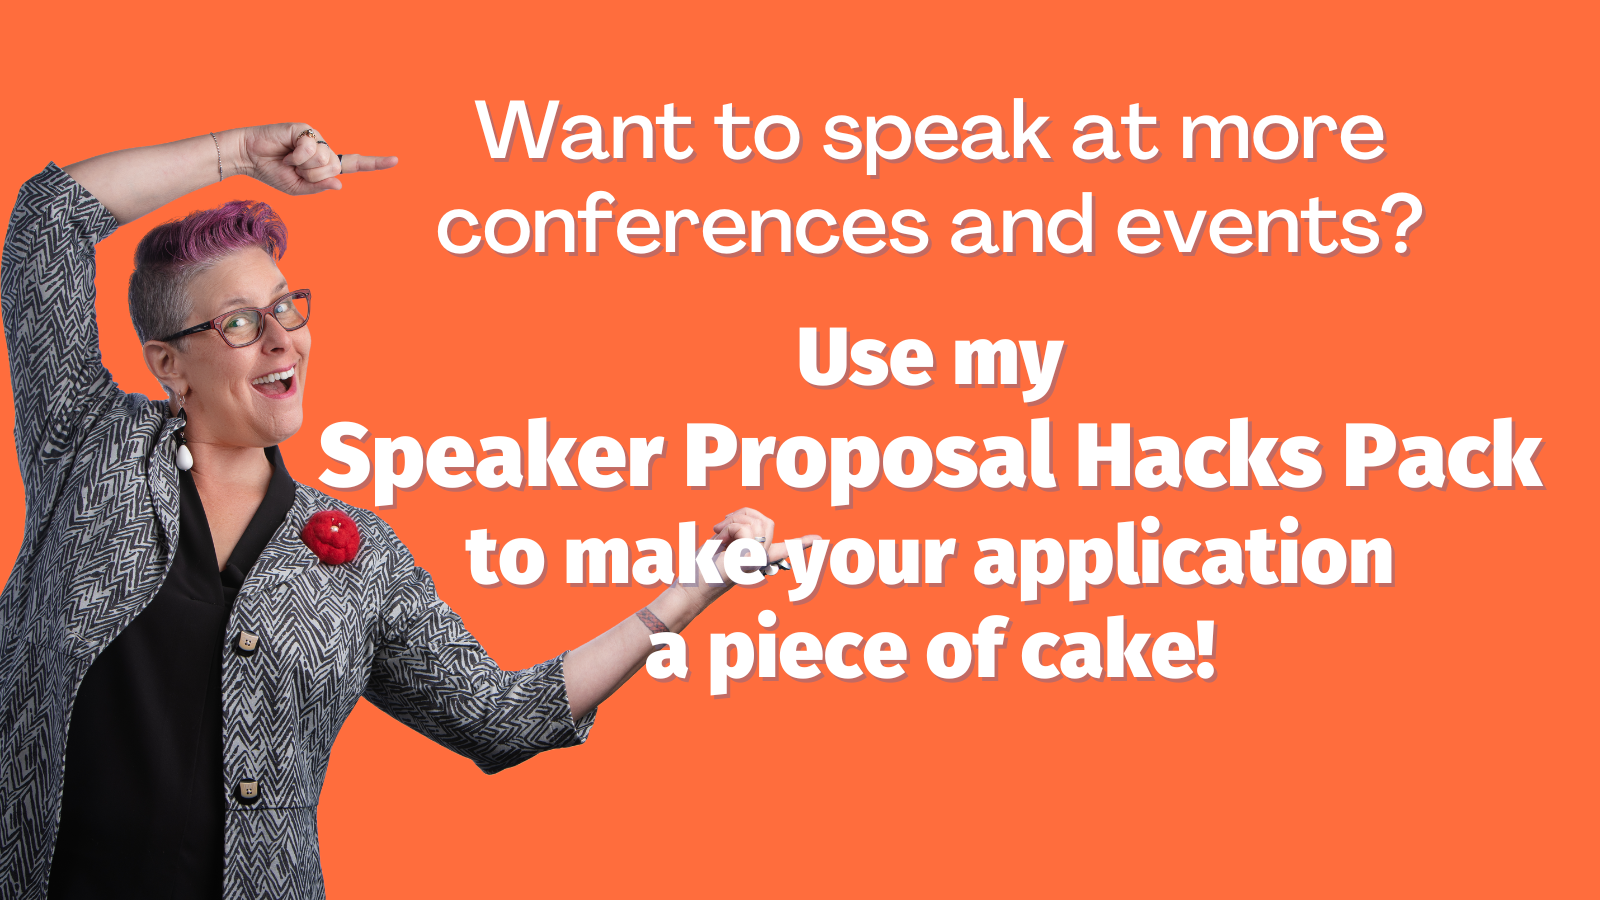 Want to speak at more conferences and events? Use my Speaker Proposal Hacks Pack to make your application a piece of cake!